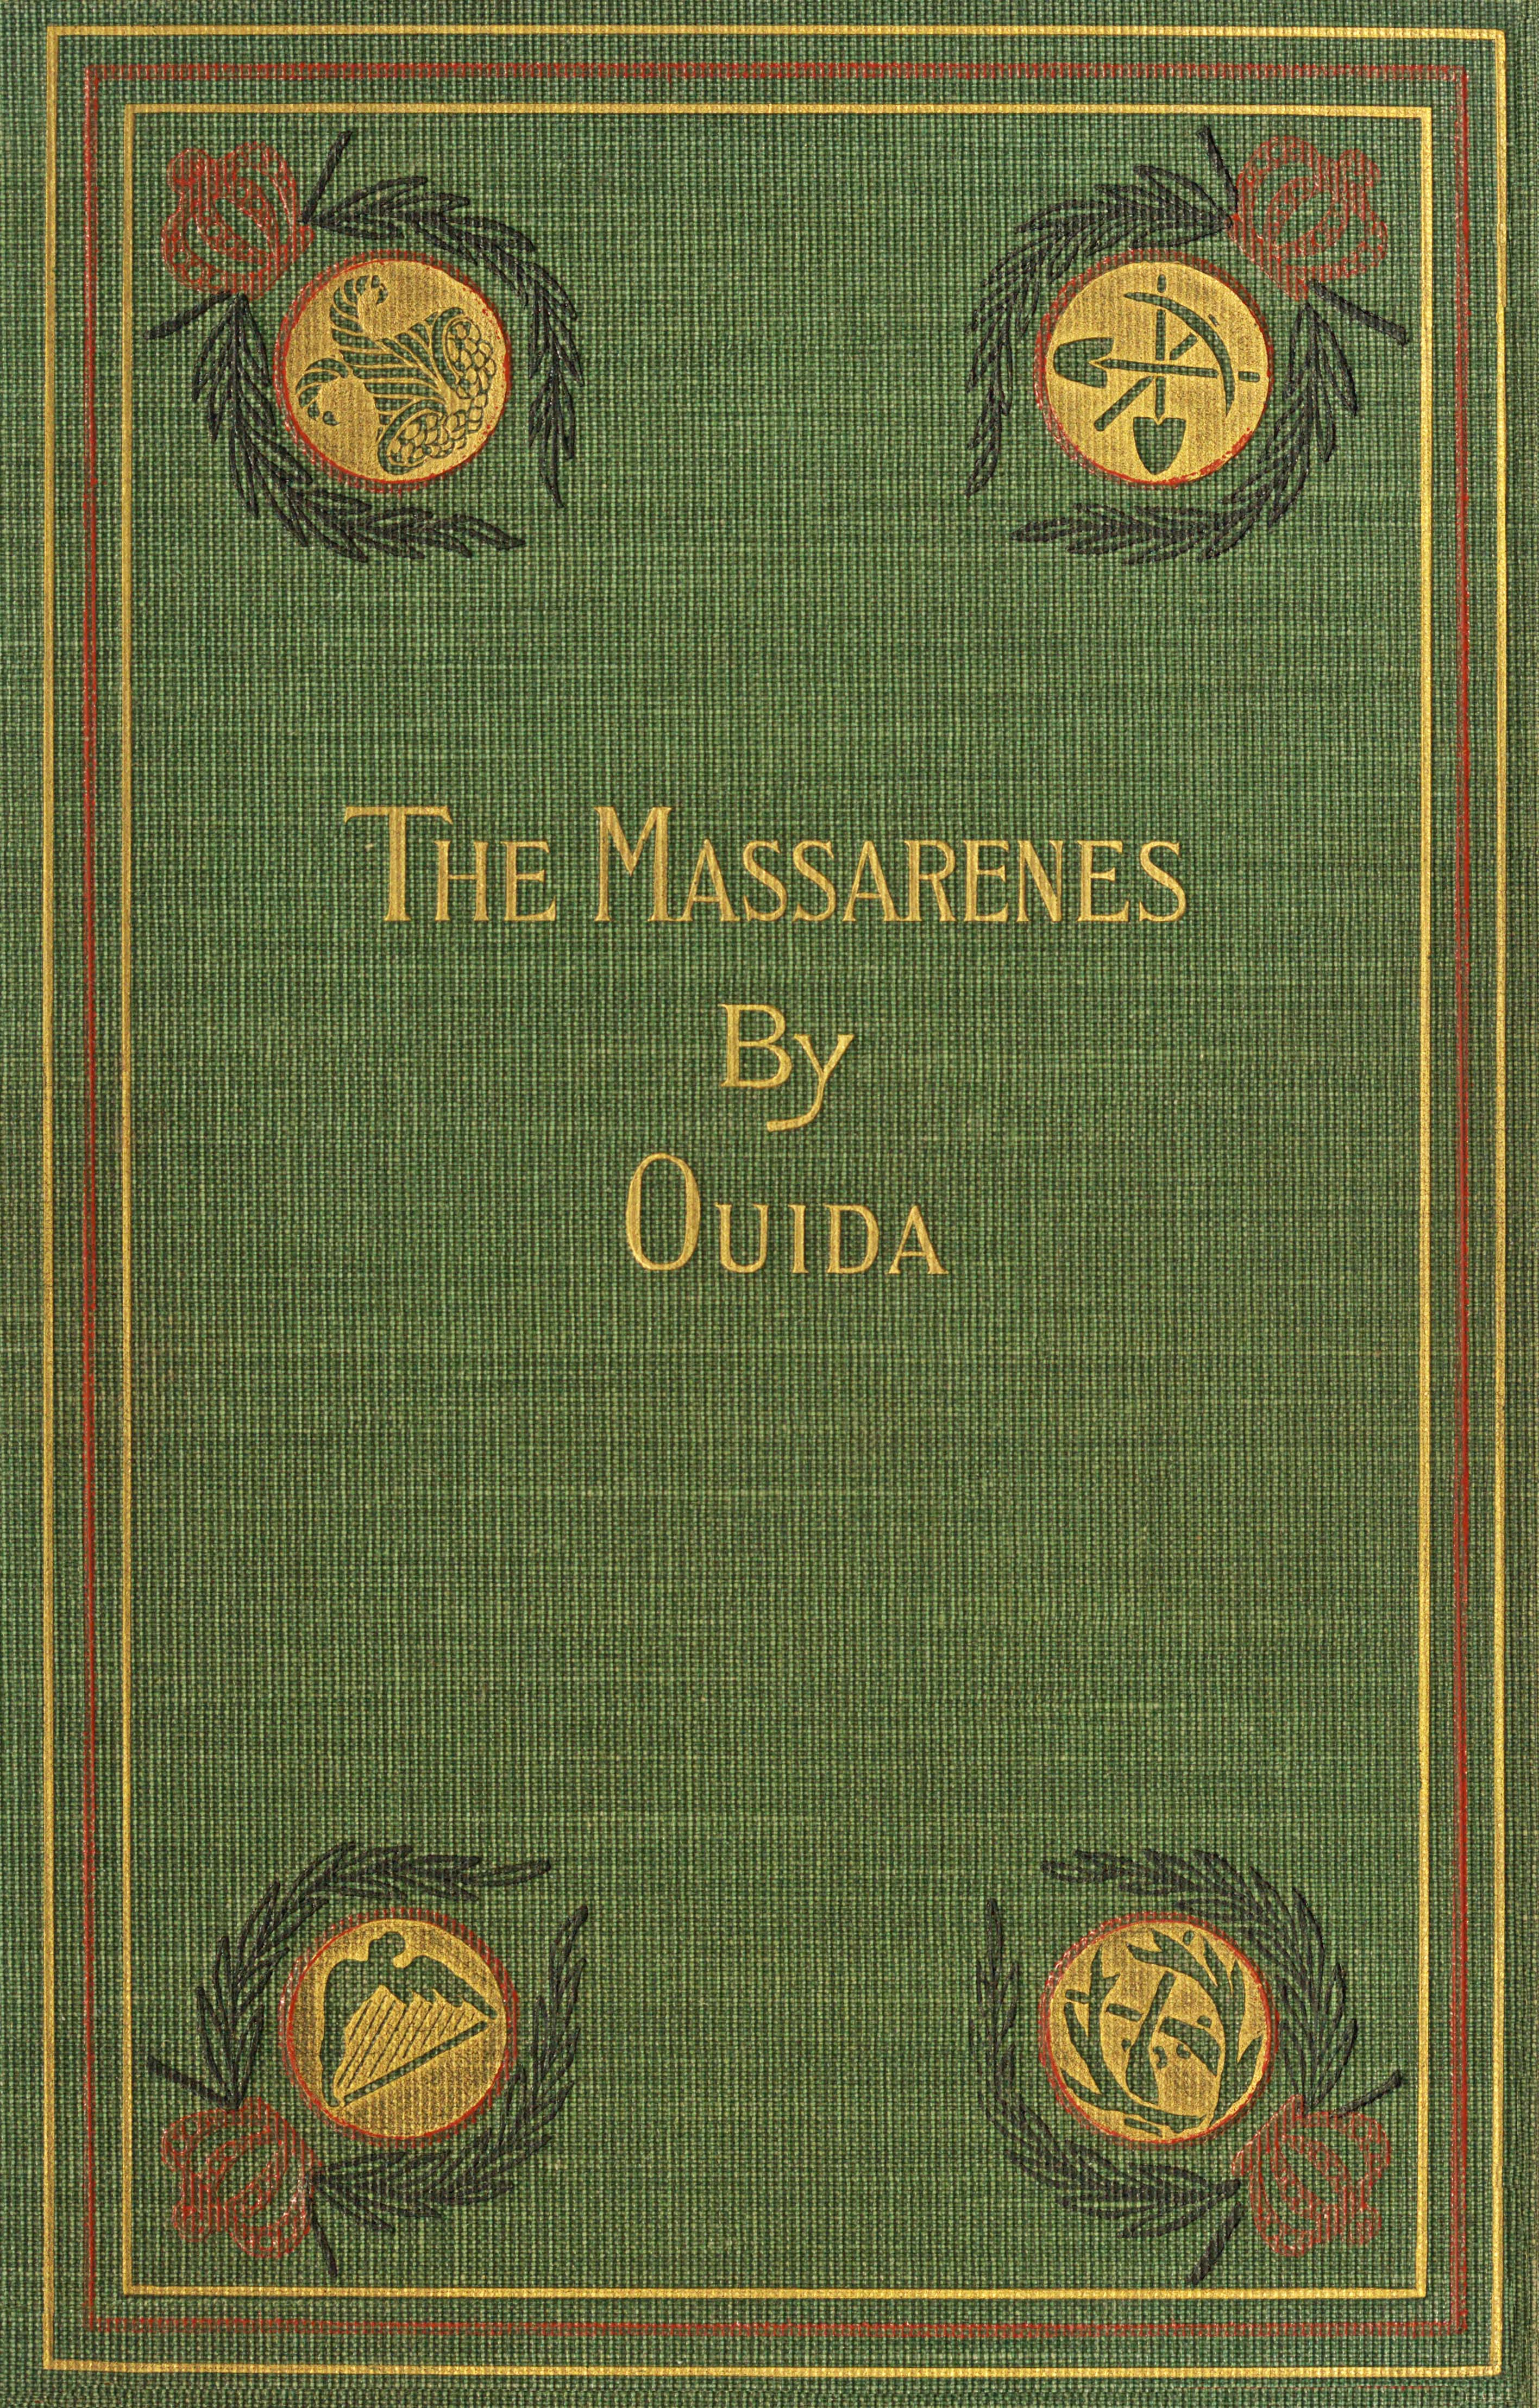 The Massarenes, by Ouida—A Project Gutenberg eBook Porn Photo